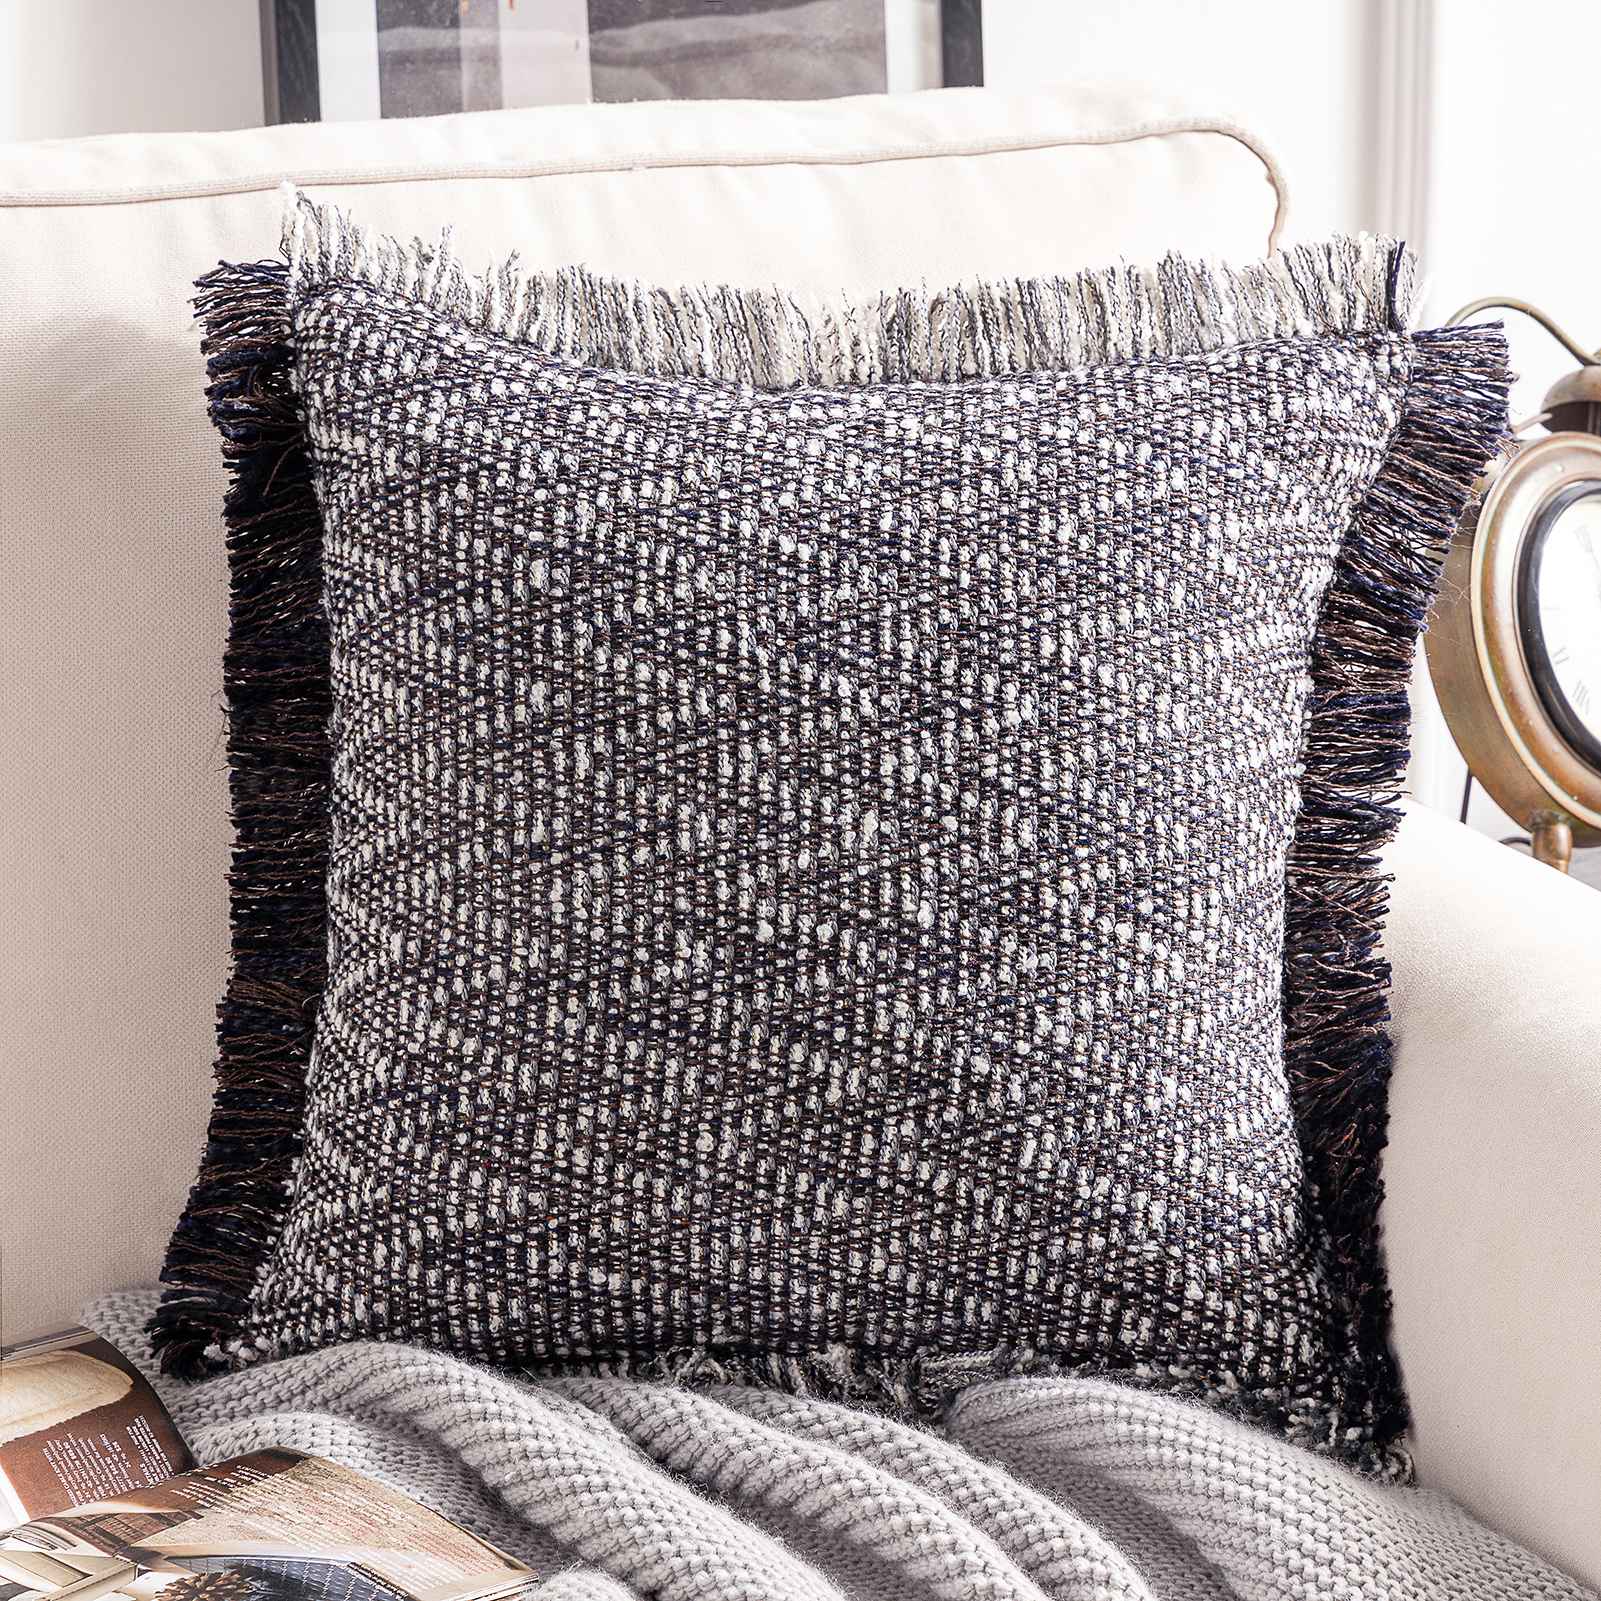 Phantoscope 100% Cotton Handmade Crochet Boho Series with Invisible Zipper Throw Pillow, 18 inch x 18 inch, Gray, 1 Pack